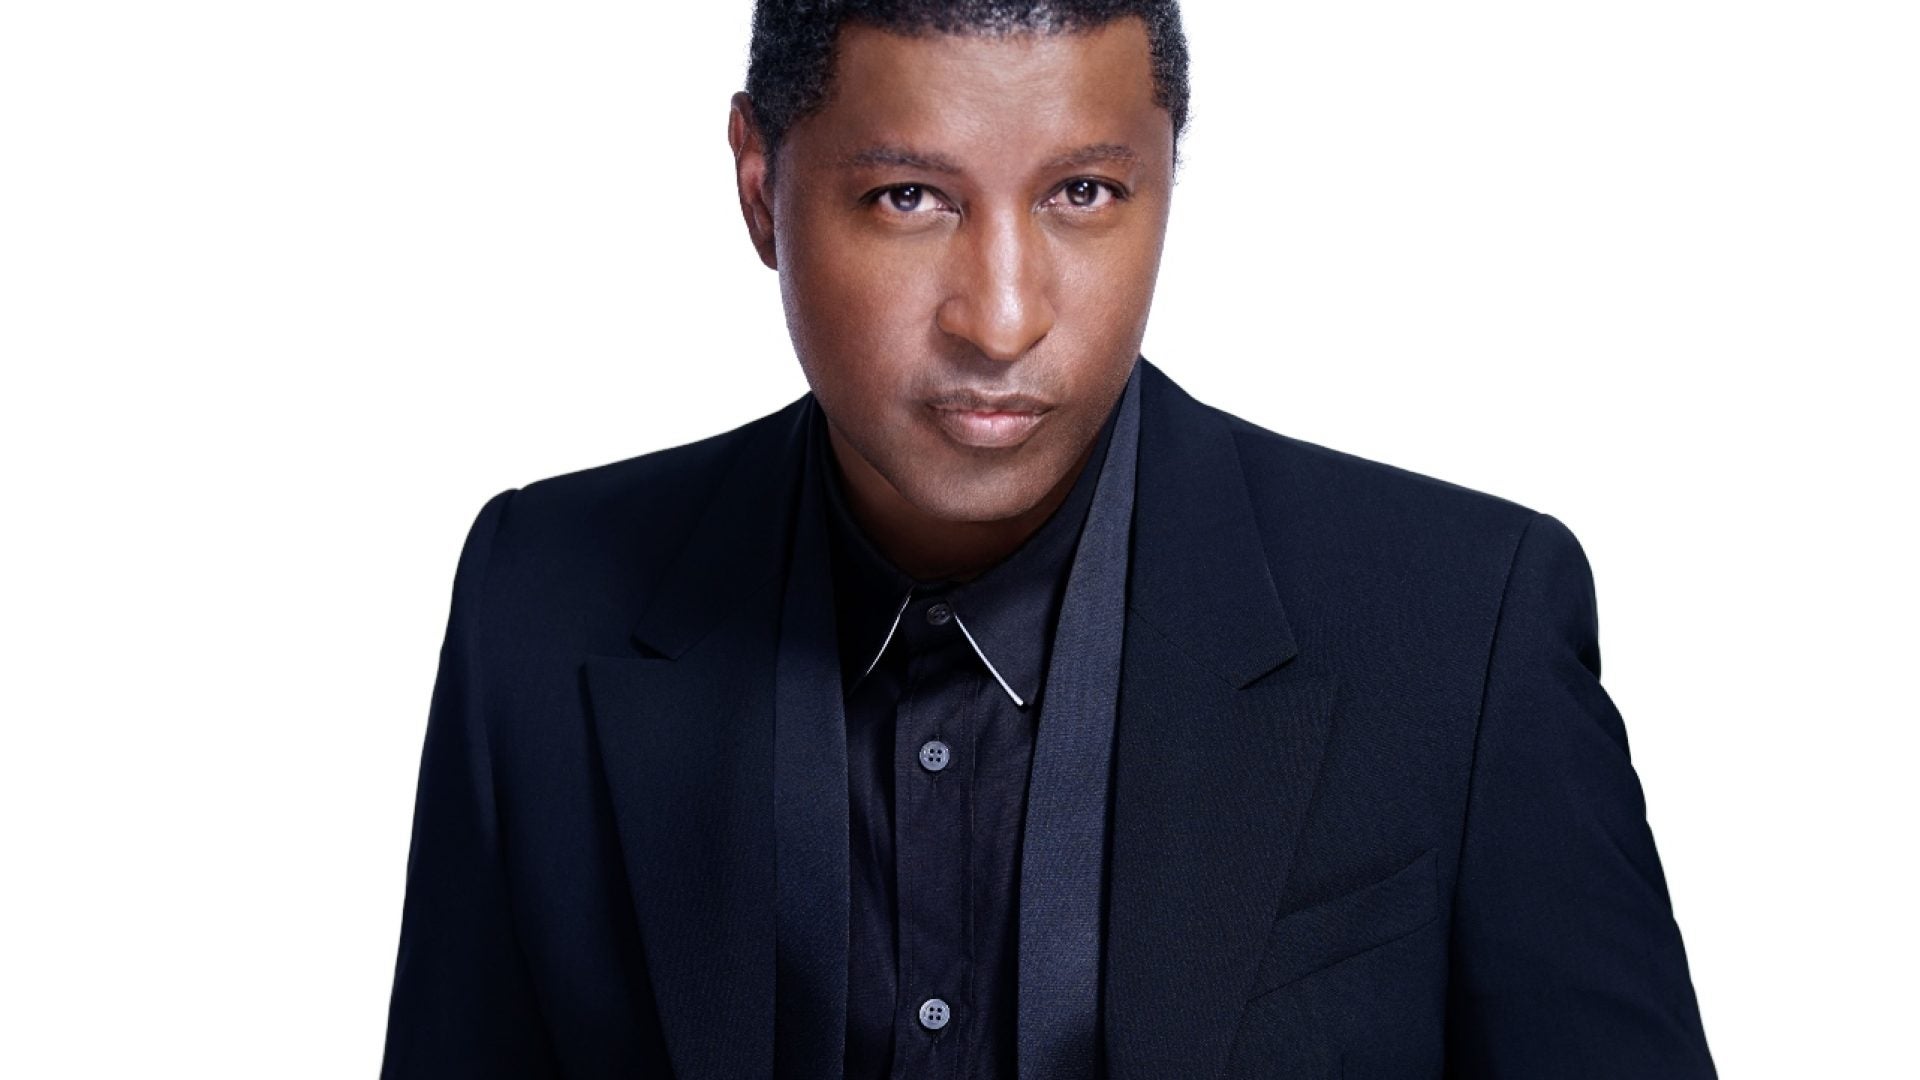 Babyface On His Experience Being A Caregiver For His Mother And How Her Alzheimer's Battle Gave Him New Purpose